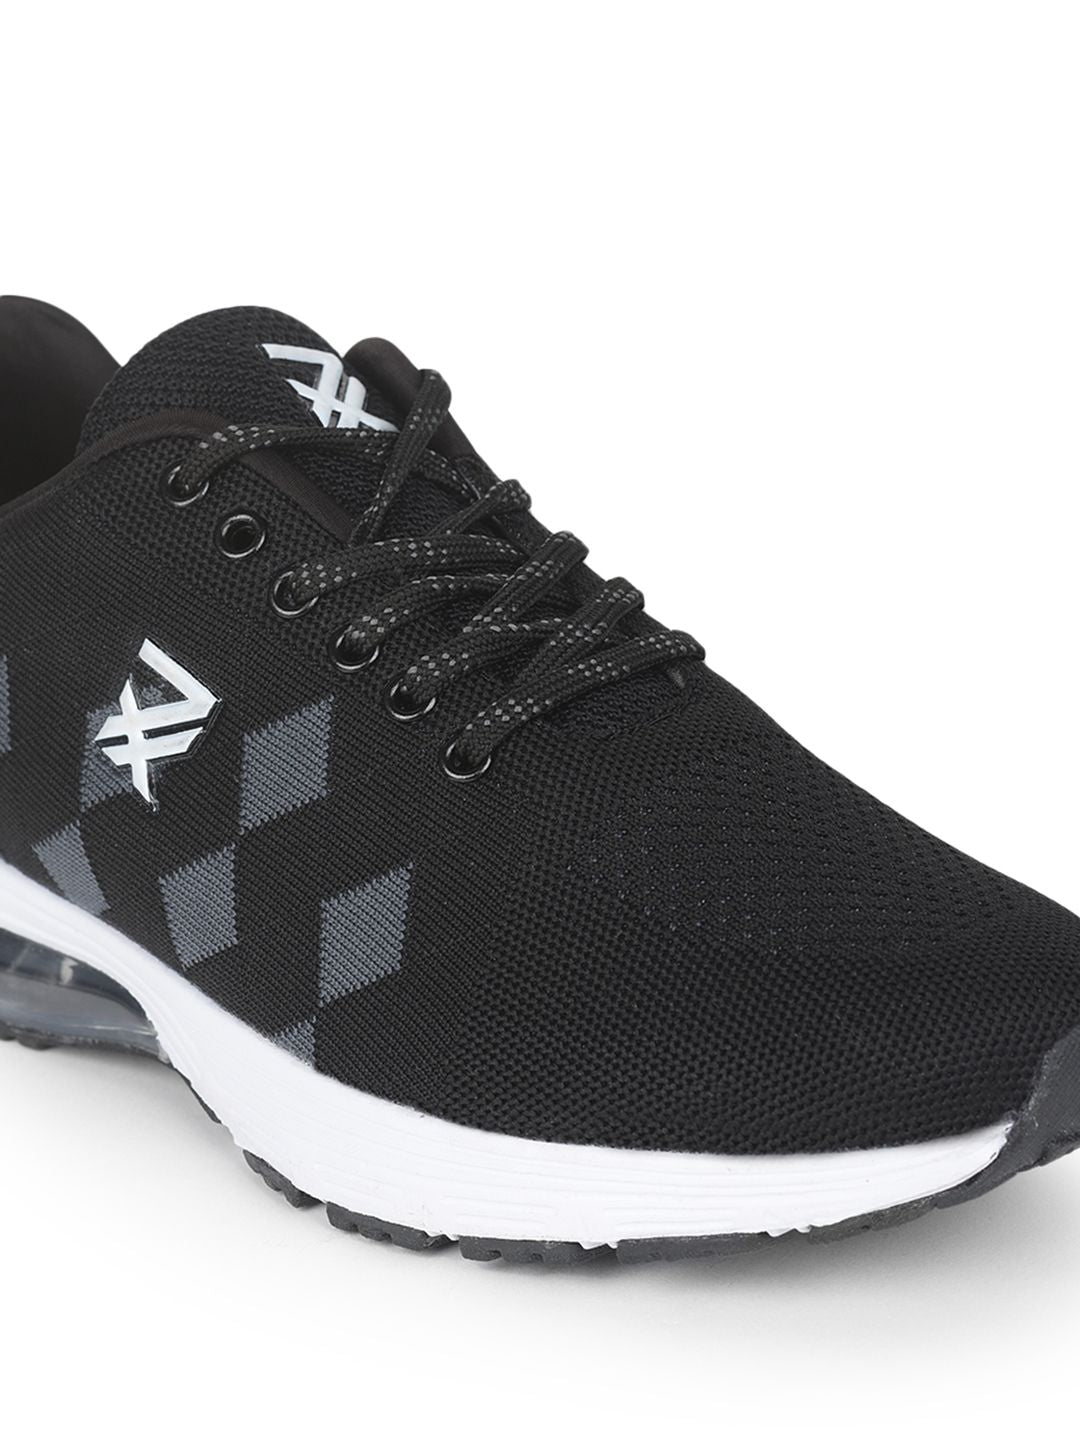 LEAP7X By Liberty Sports Shoes For MENS (59760021) | Book Bargain Buy